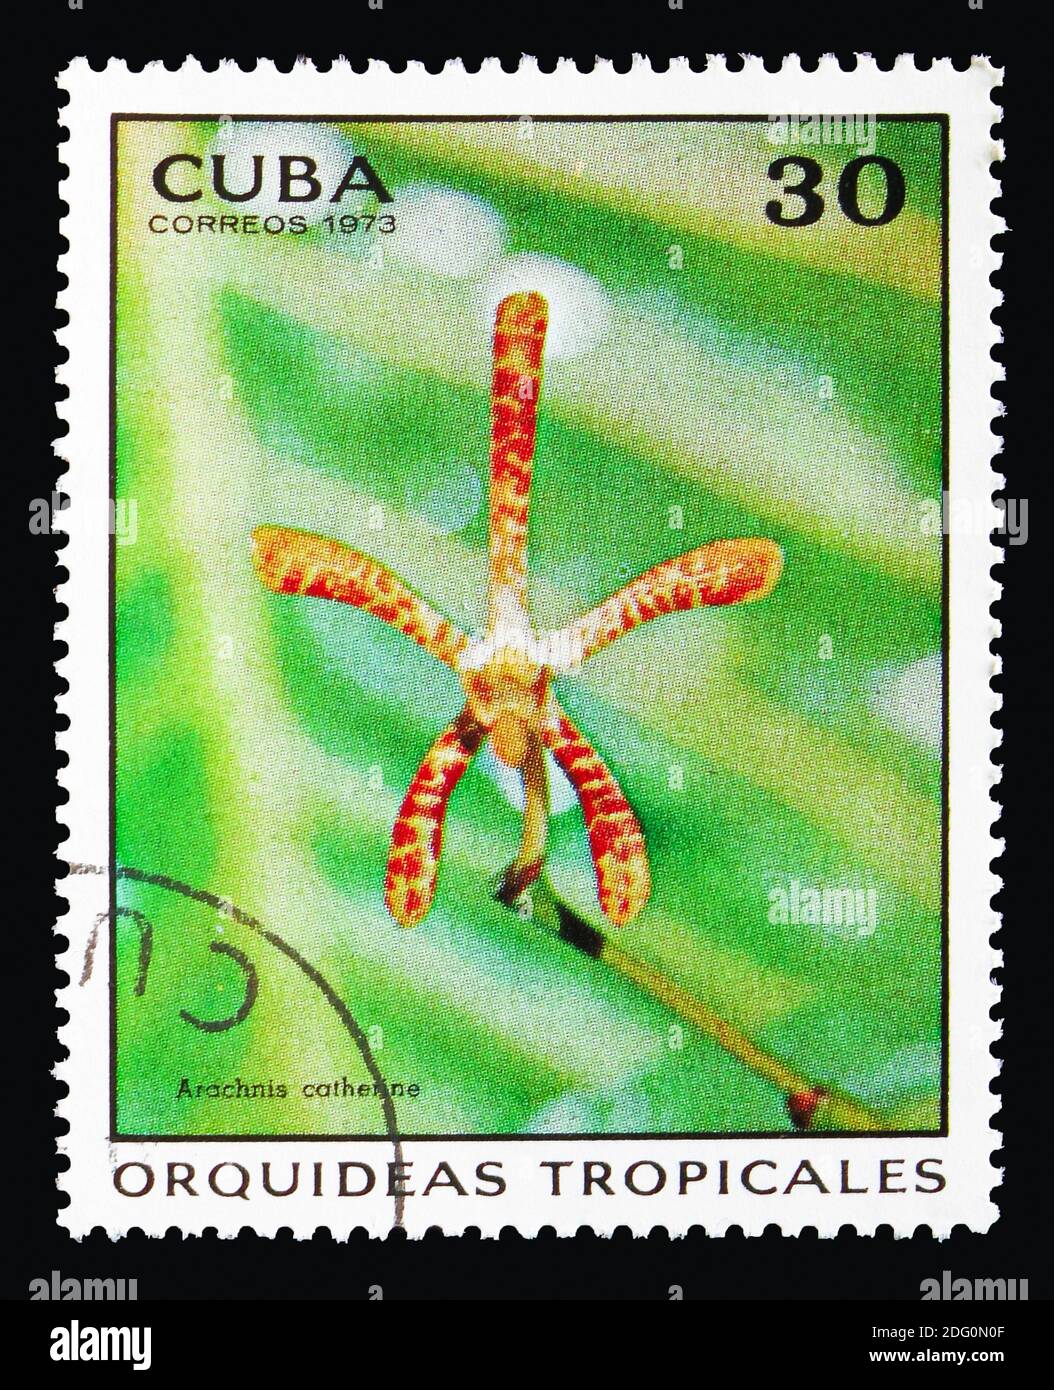 MOSCOW, RUSSIA - AUGUST 18, 2018: A stamp printed in Cuba shows Arachnis catherine, Orchids serie, circa 1973 Stock Photo